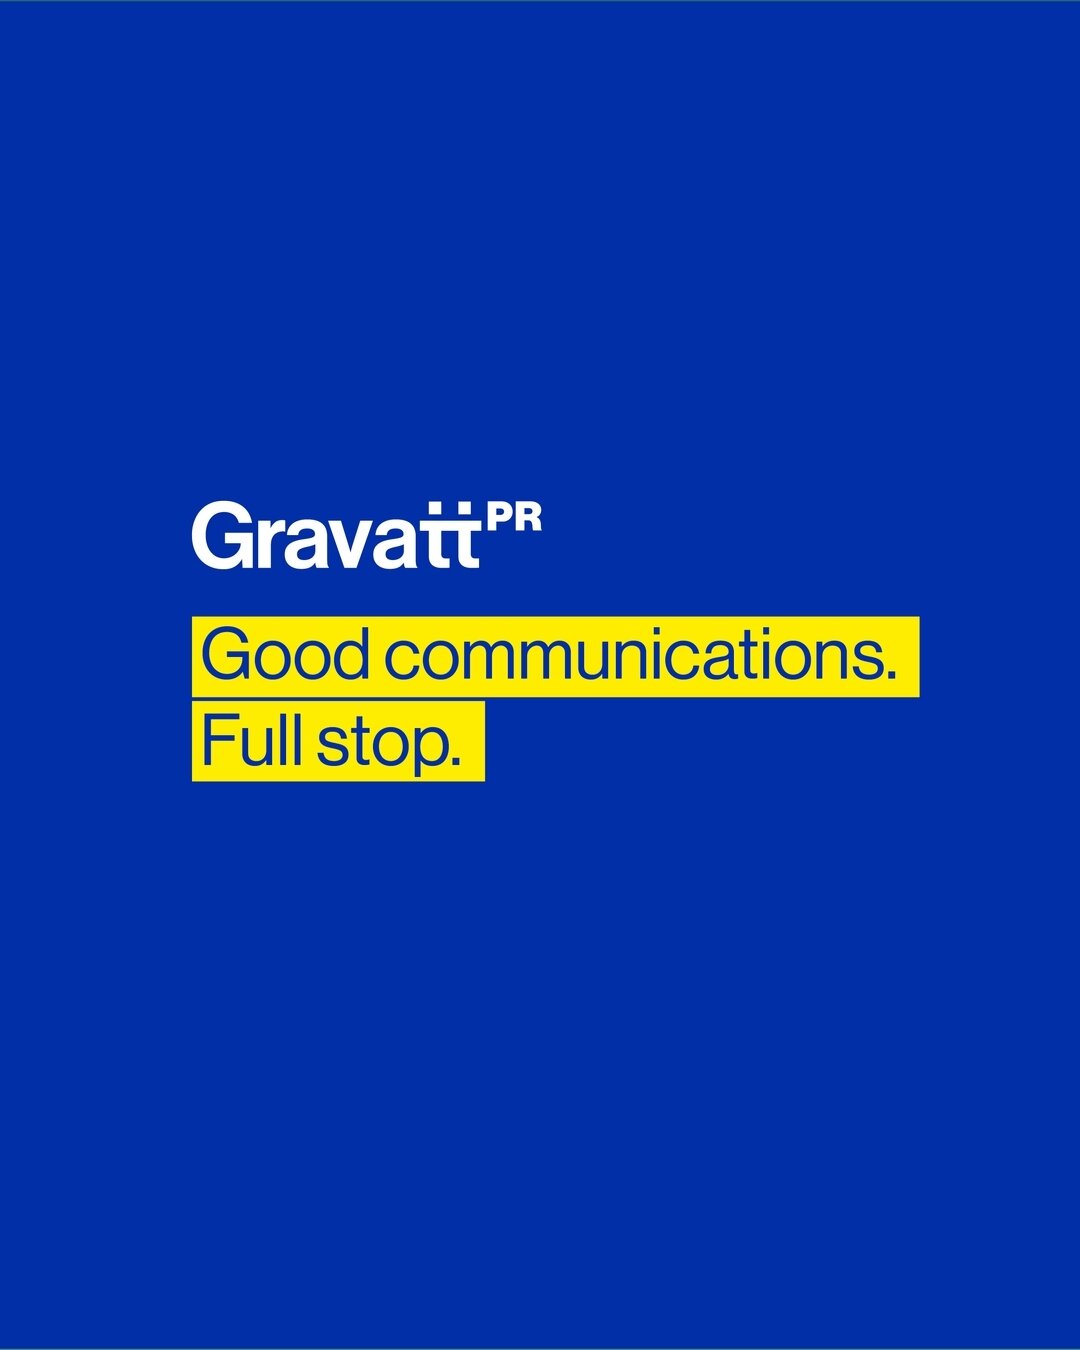 First impressions count. 👀

Especially important when you specialise in communications.

Introducing the new brand identity for Gravatt PR! 

What catches your eye? The distinctive logo, bold colours, simple typography, clean lines, or punchy highli